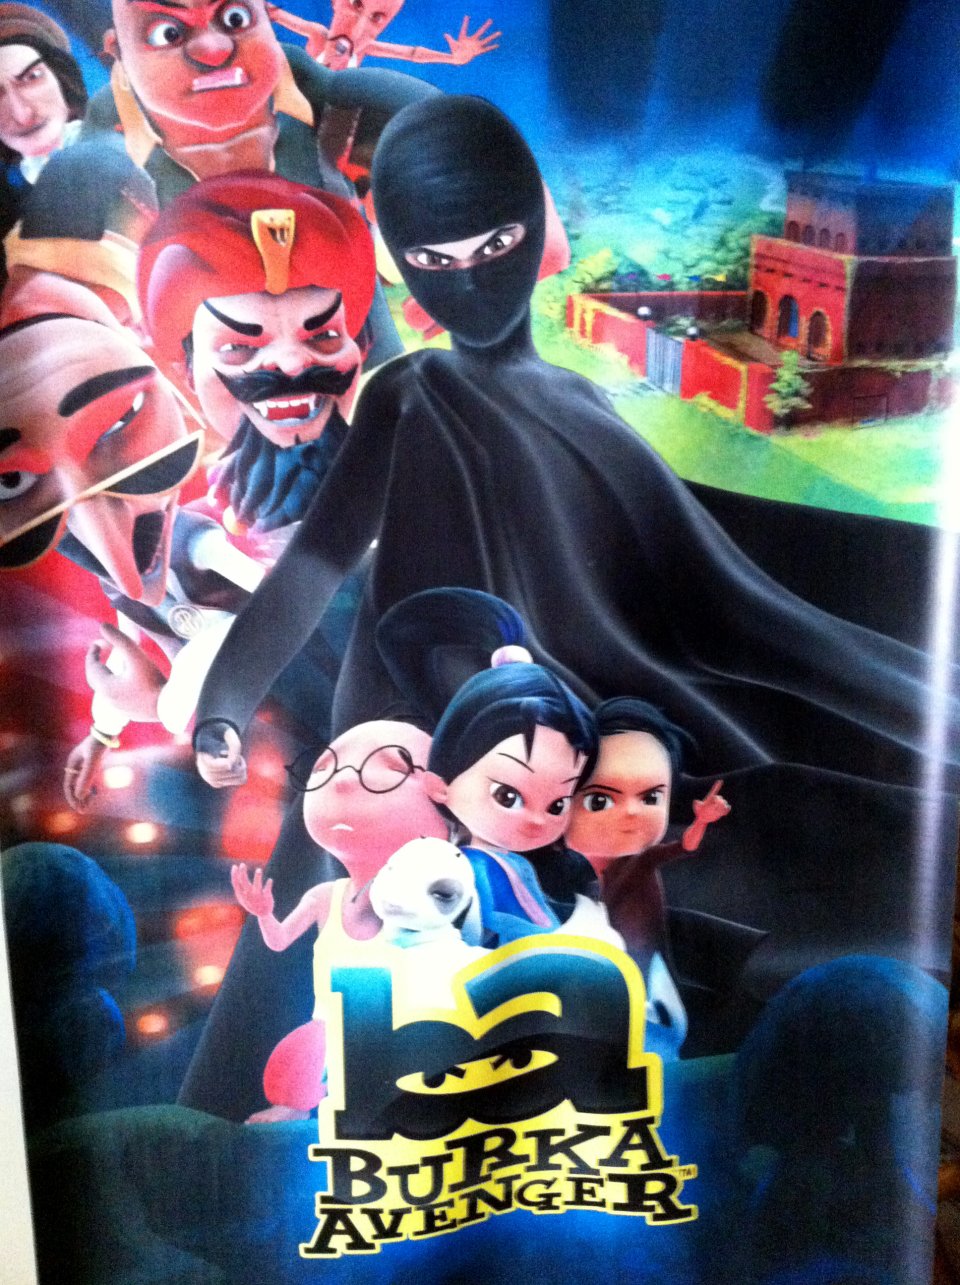 This Thursday, July 11, 2013 photo shows a poster for the "Burka Avenger" cartoon series, which is scheduled to start running on Geo TV in early August. Wonder Woman and Supergirl now have a Pakistani counterpart in the pantheon of female superheroes _ one who shows a lot less skin. Meet Burka Avenger: a mild-mannered teacher with secret martial arts skills who uses a flowing black burka to hide her identity as she fights local thugs seeking to shut down the girls' school where she works. Sadly, it's a battle Pakistanis are all too familiar with in the real world.(AP Photo/Sebastian Abbot)